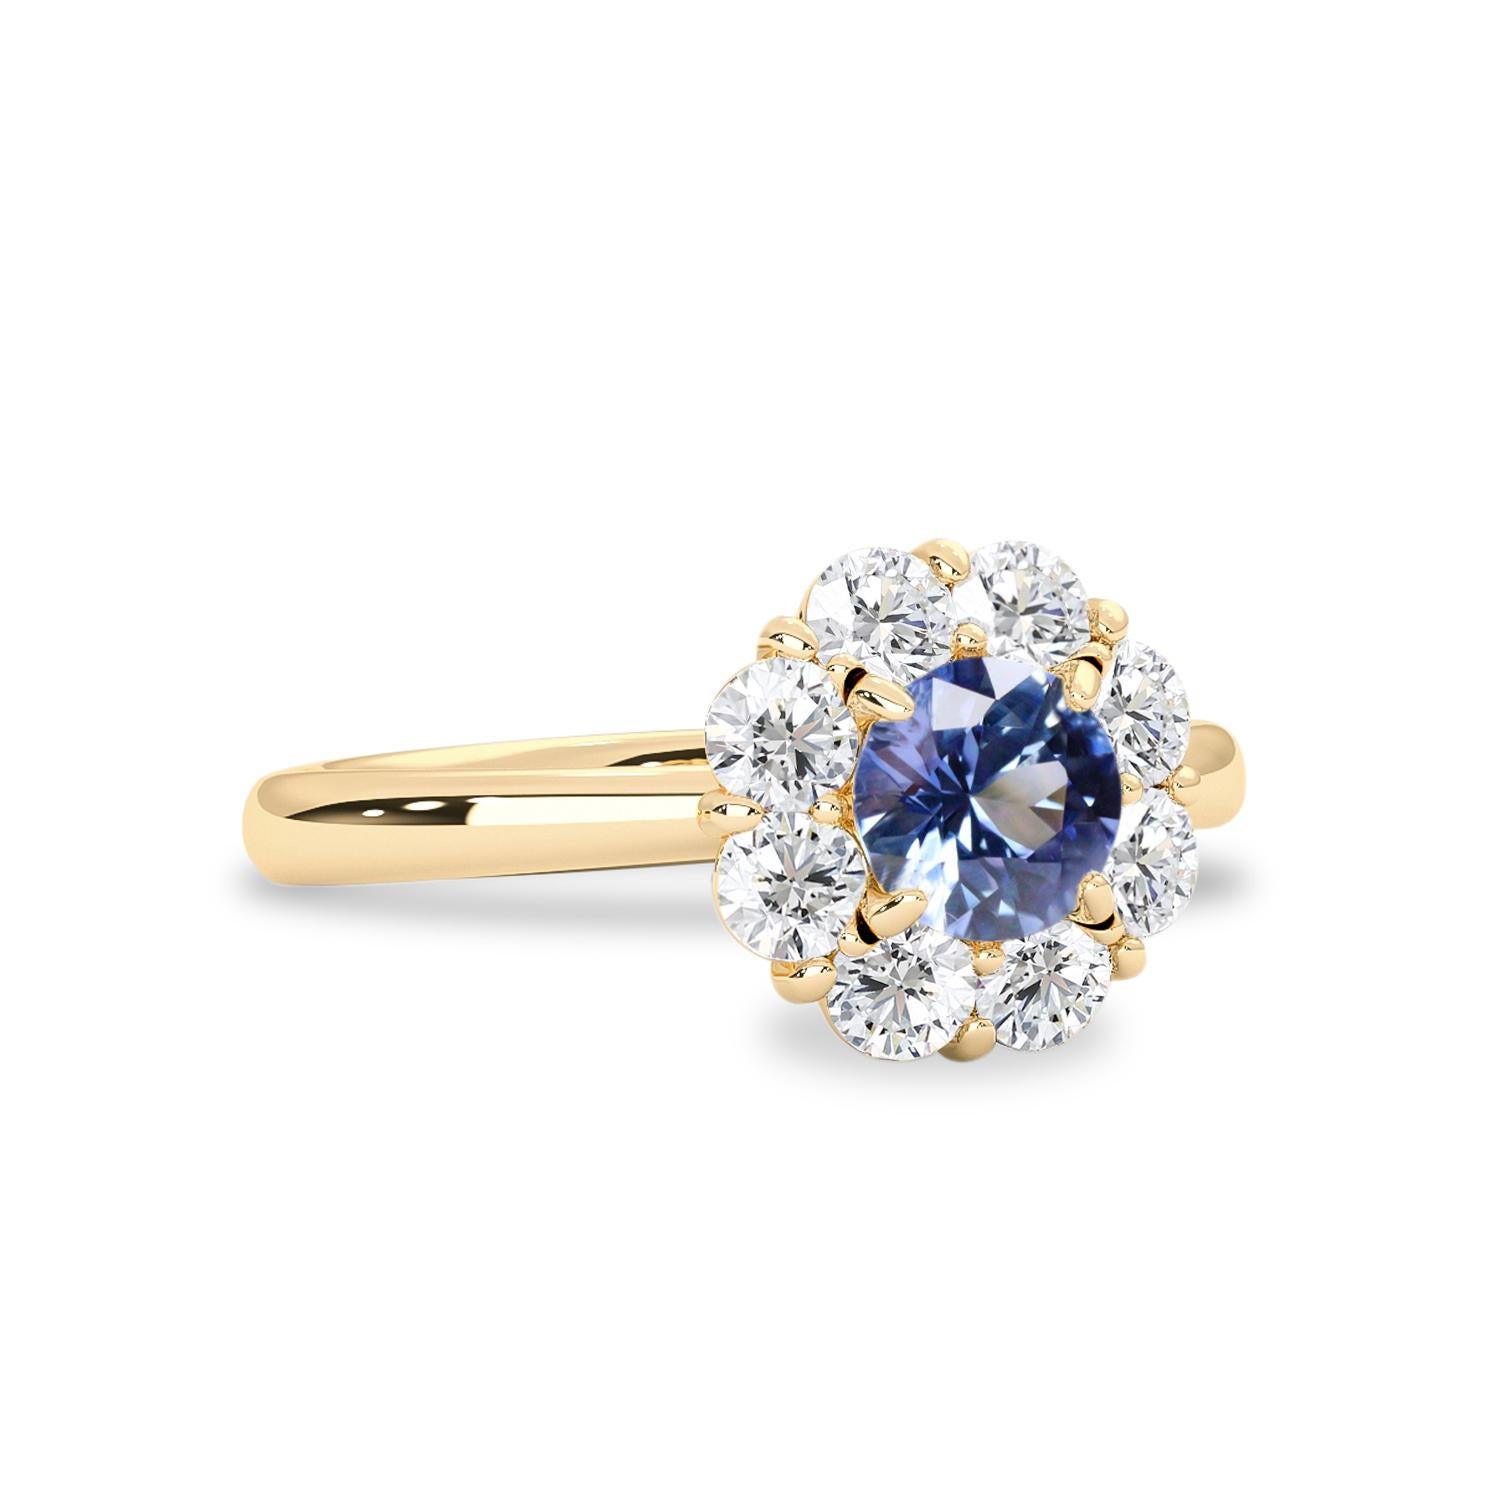 Natural blue sapphire and diamond are the stones representing true love, self-mastery, and strength. With our True Love Halo Engagement Ring plain band edition, we combine all the wonderful things together and turn them into a lifelong statement